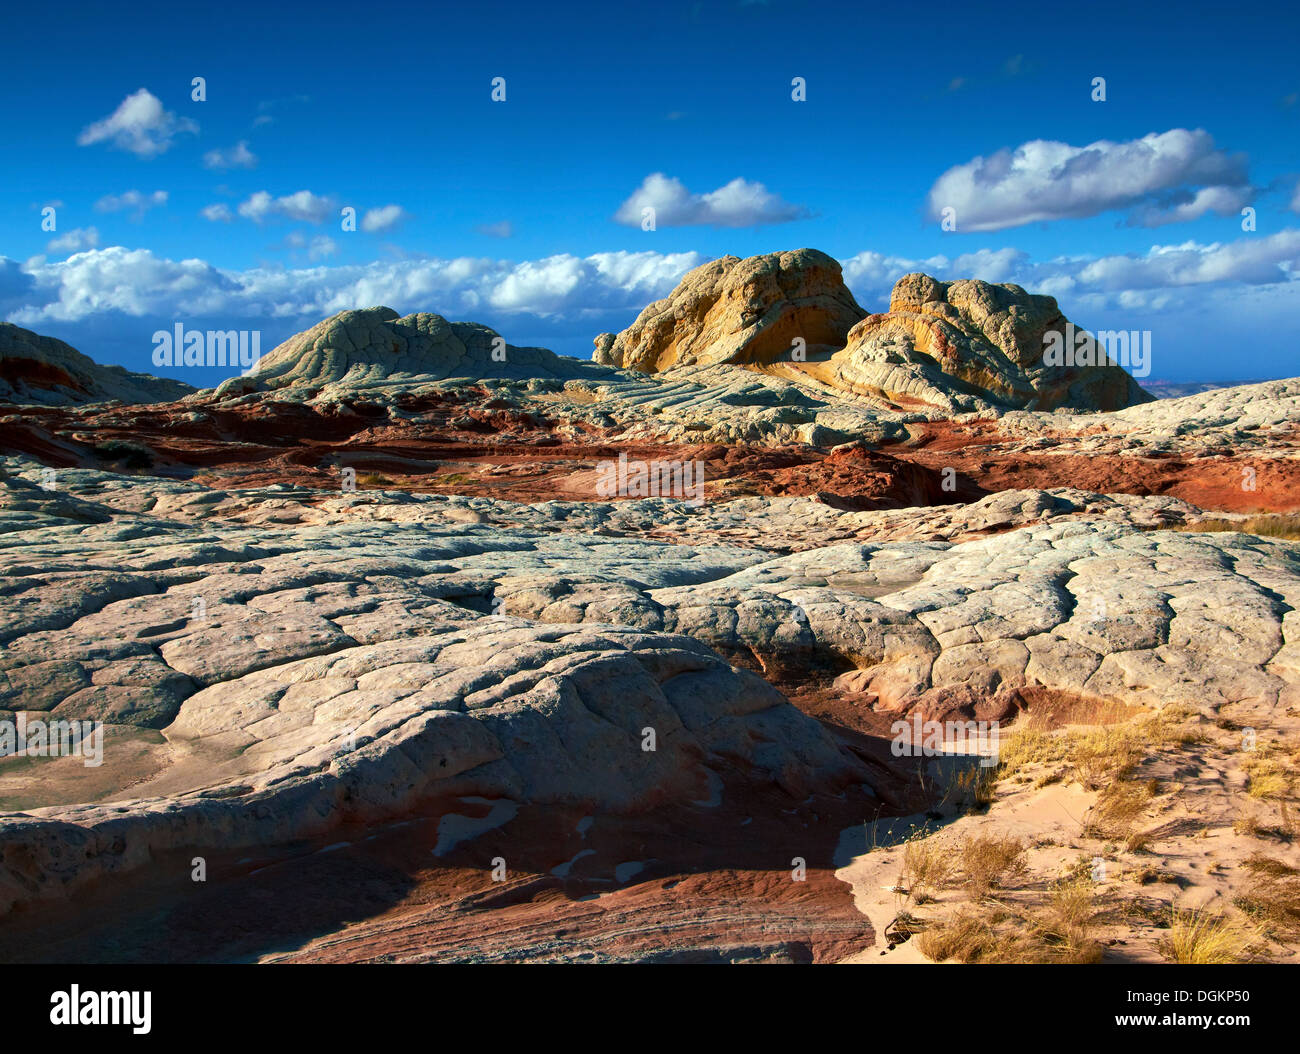 A view of the White Pocket rock formations. Stock Photo